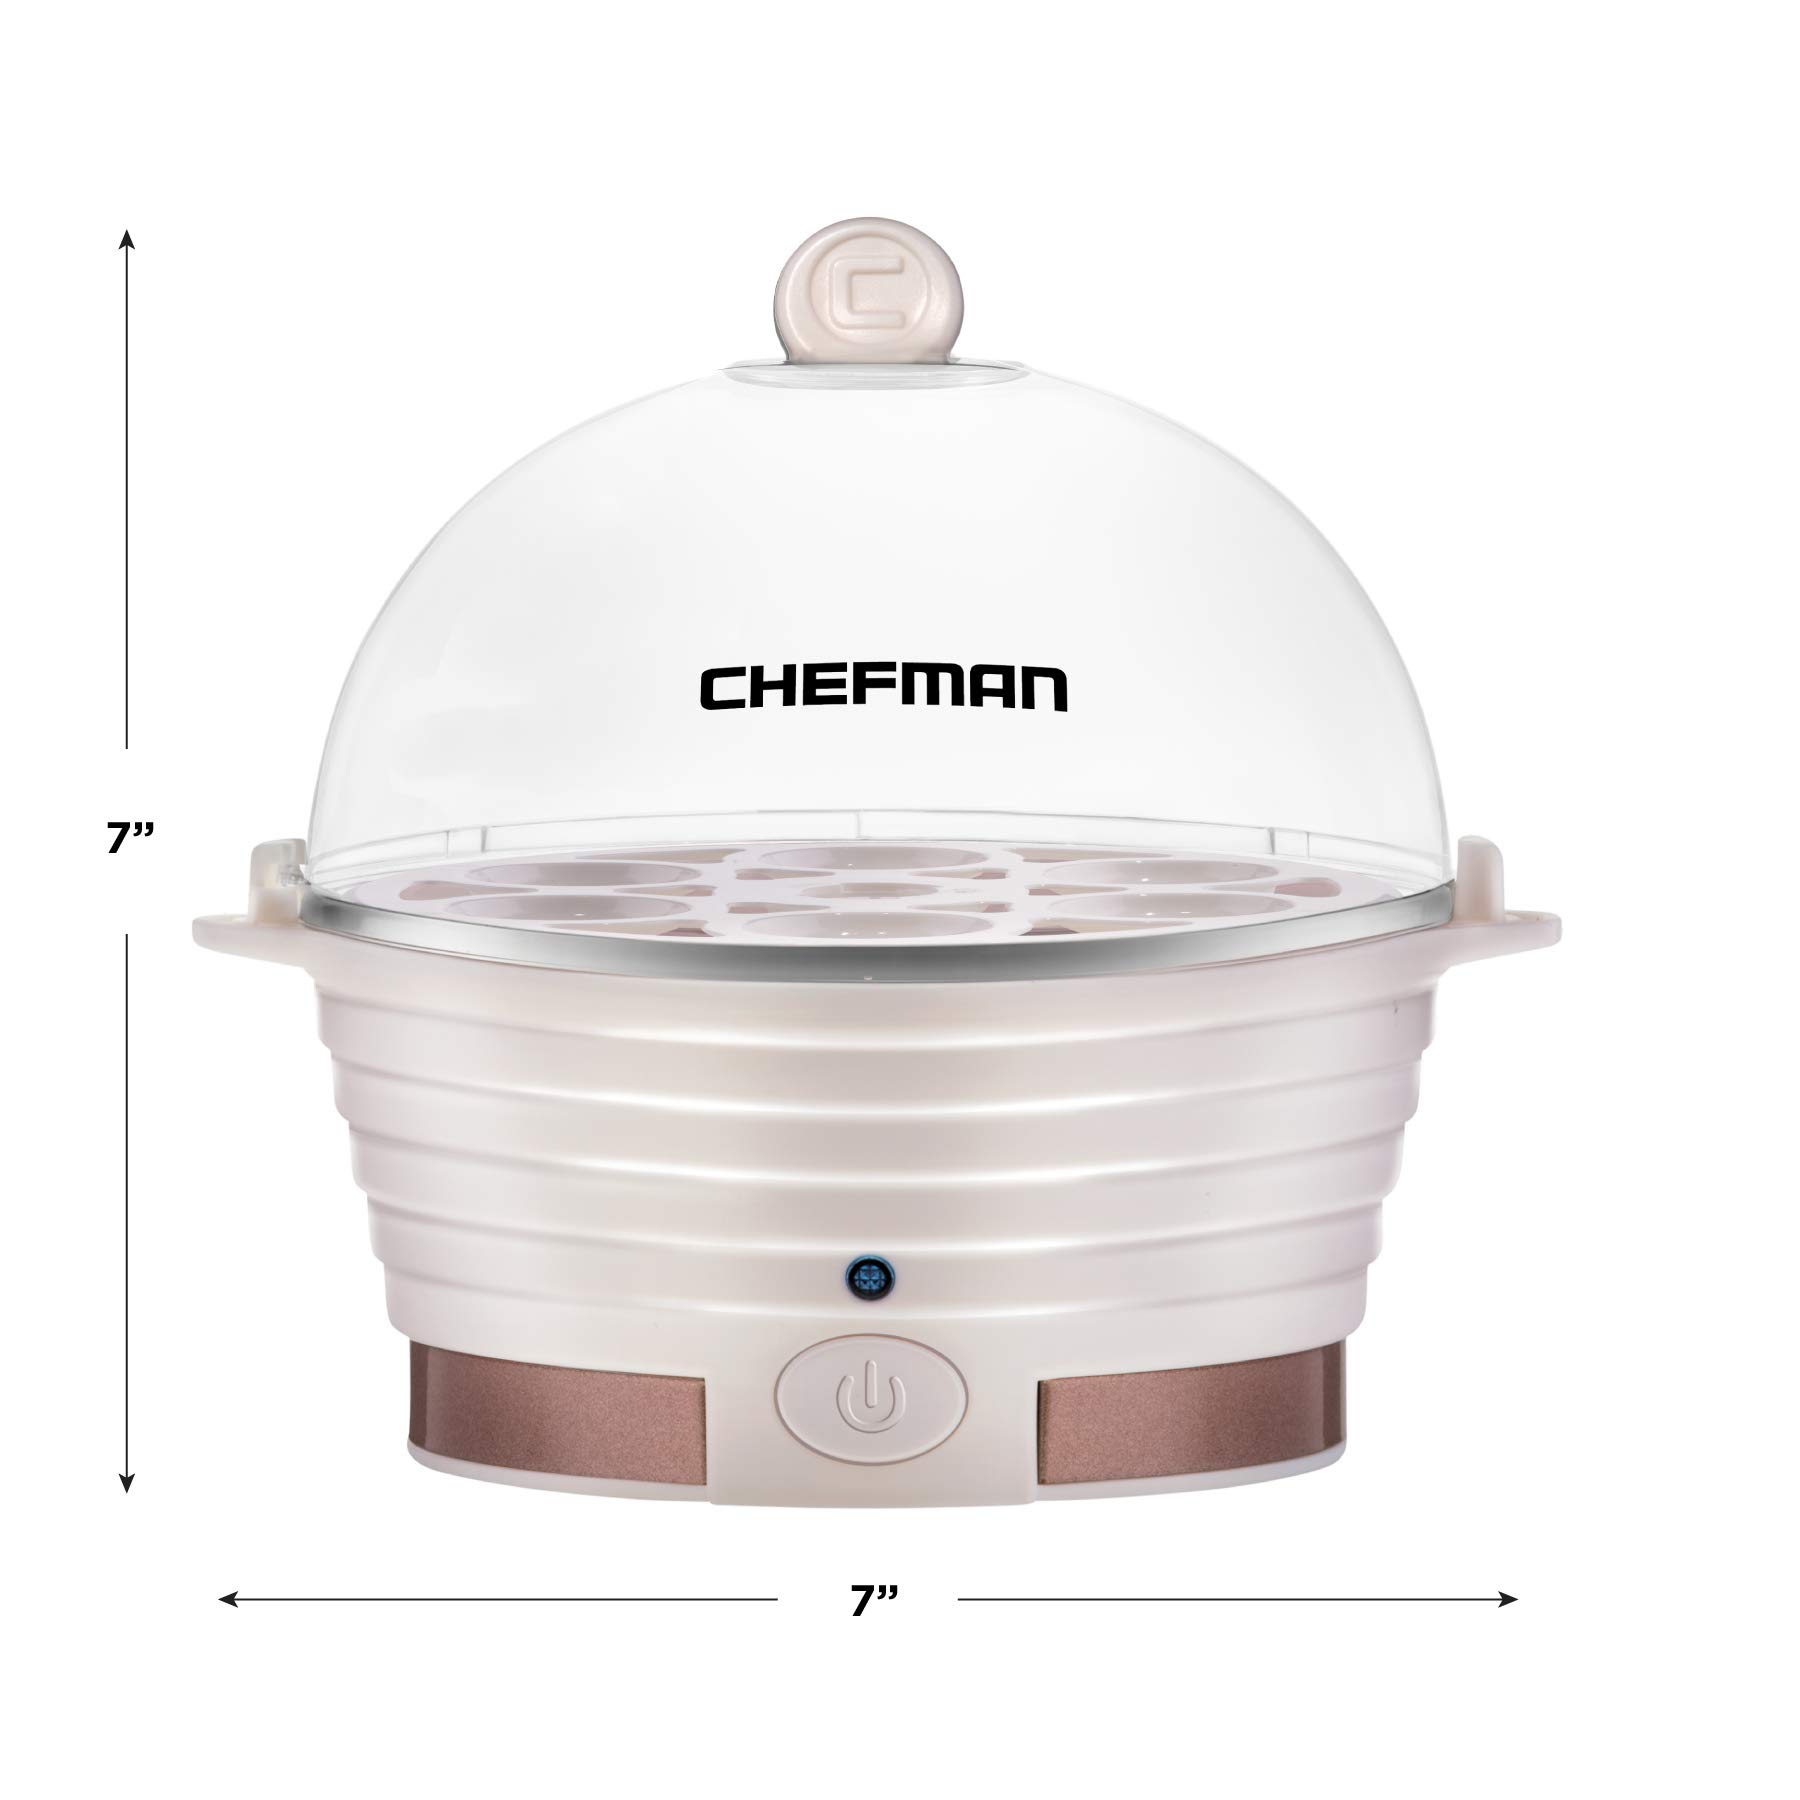 Chefman Electric Egg Cooker Boiler Rapid Poacher, Food & Vegetable Steamer, Quickly Makes Up to 6, Hard, Medium or Soft Boiled, Poaching/Omelet Tray Included, Ready Signal, BPA-Free, Ivory